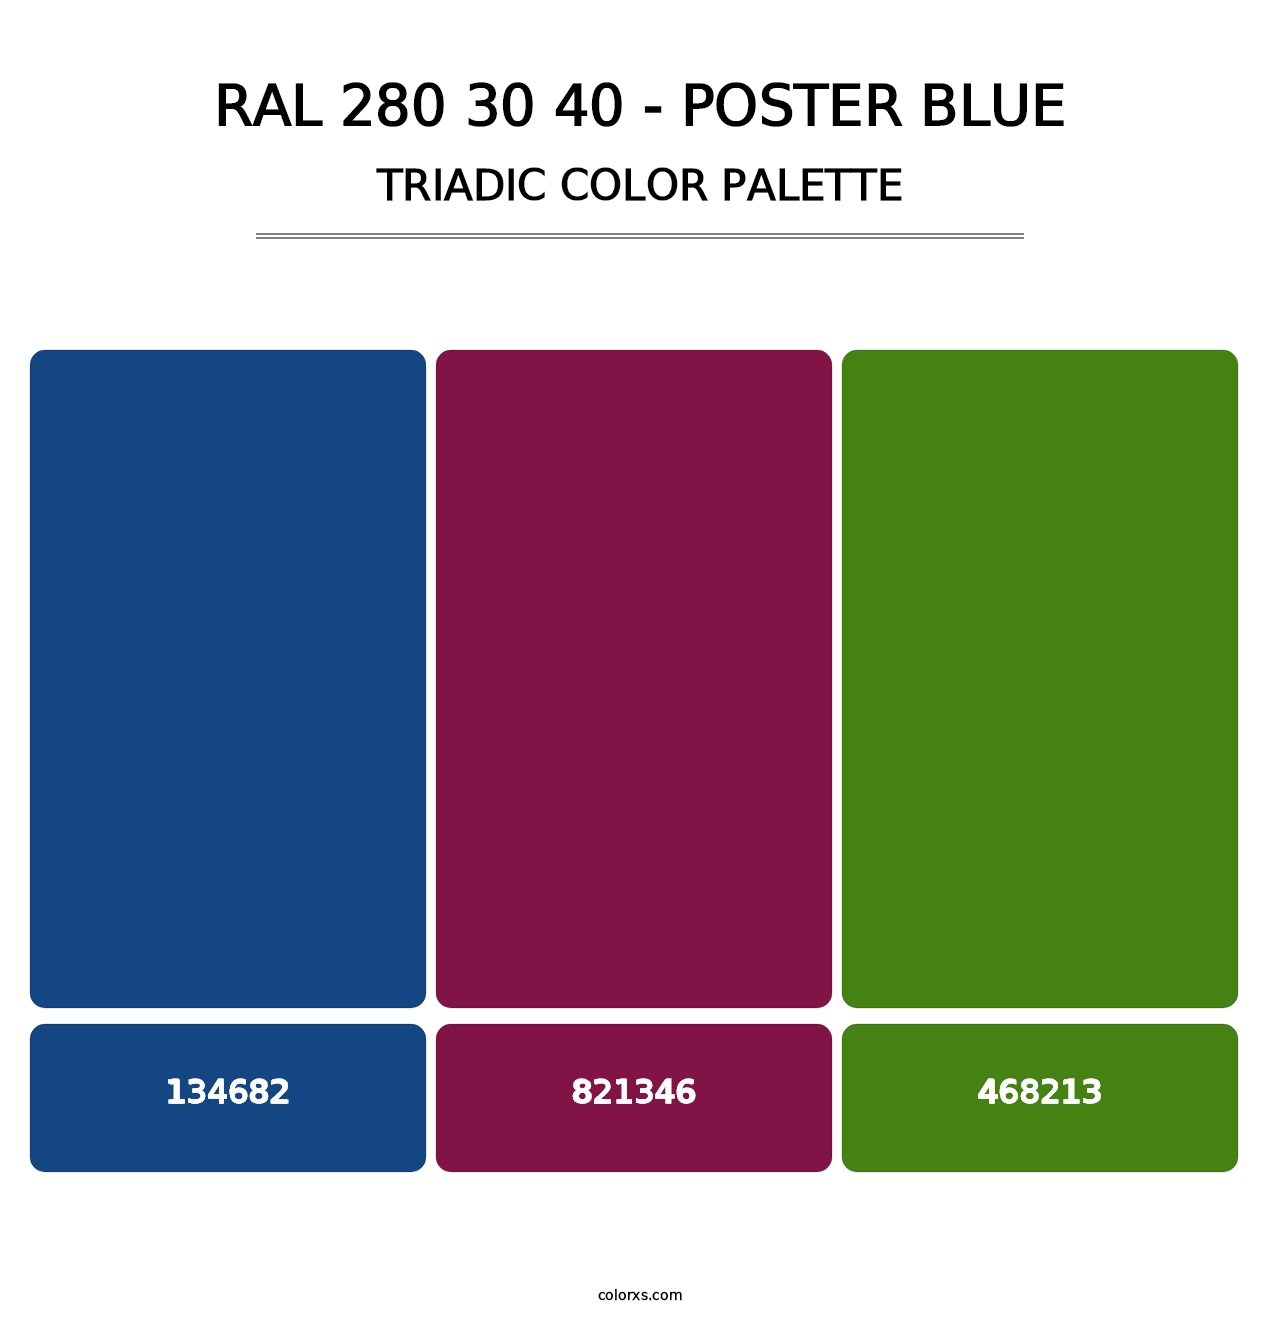 RAL 280 30 40 - Poster Blue - Triadic Color Palette